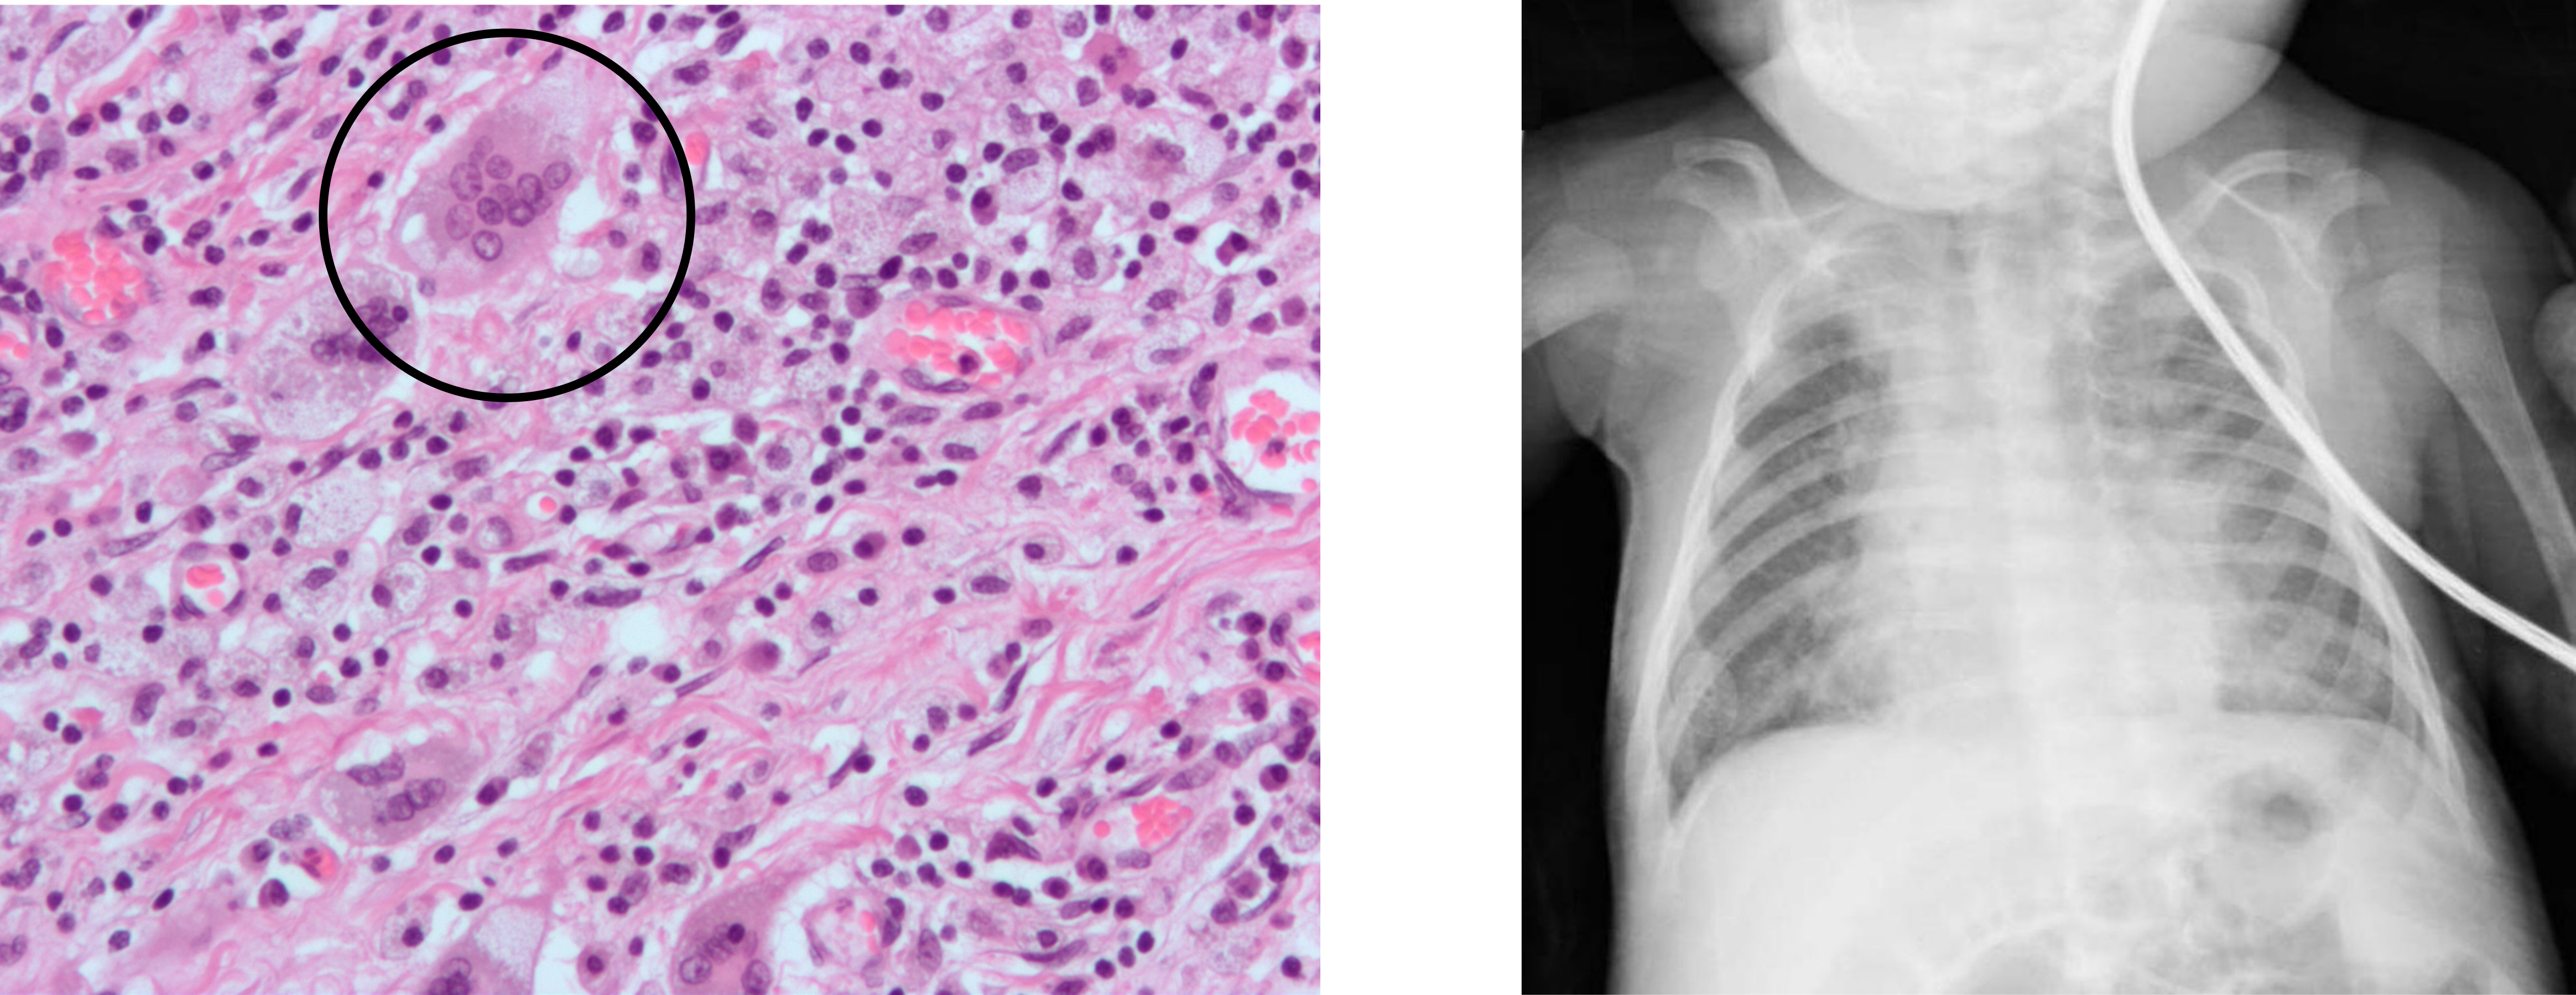 Two panels show examples of RSV infection. The first (left) is a histology slide of consolidated airspace within which a circled area shows a large cell with multiple nuclei (syncytial giant cell). The second image (right) is a chest x-ray of a child. Areas of increased tissue density are apparent around the position of the sternum indicating inflammation that follows the tracts of the major bronchi.